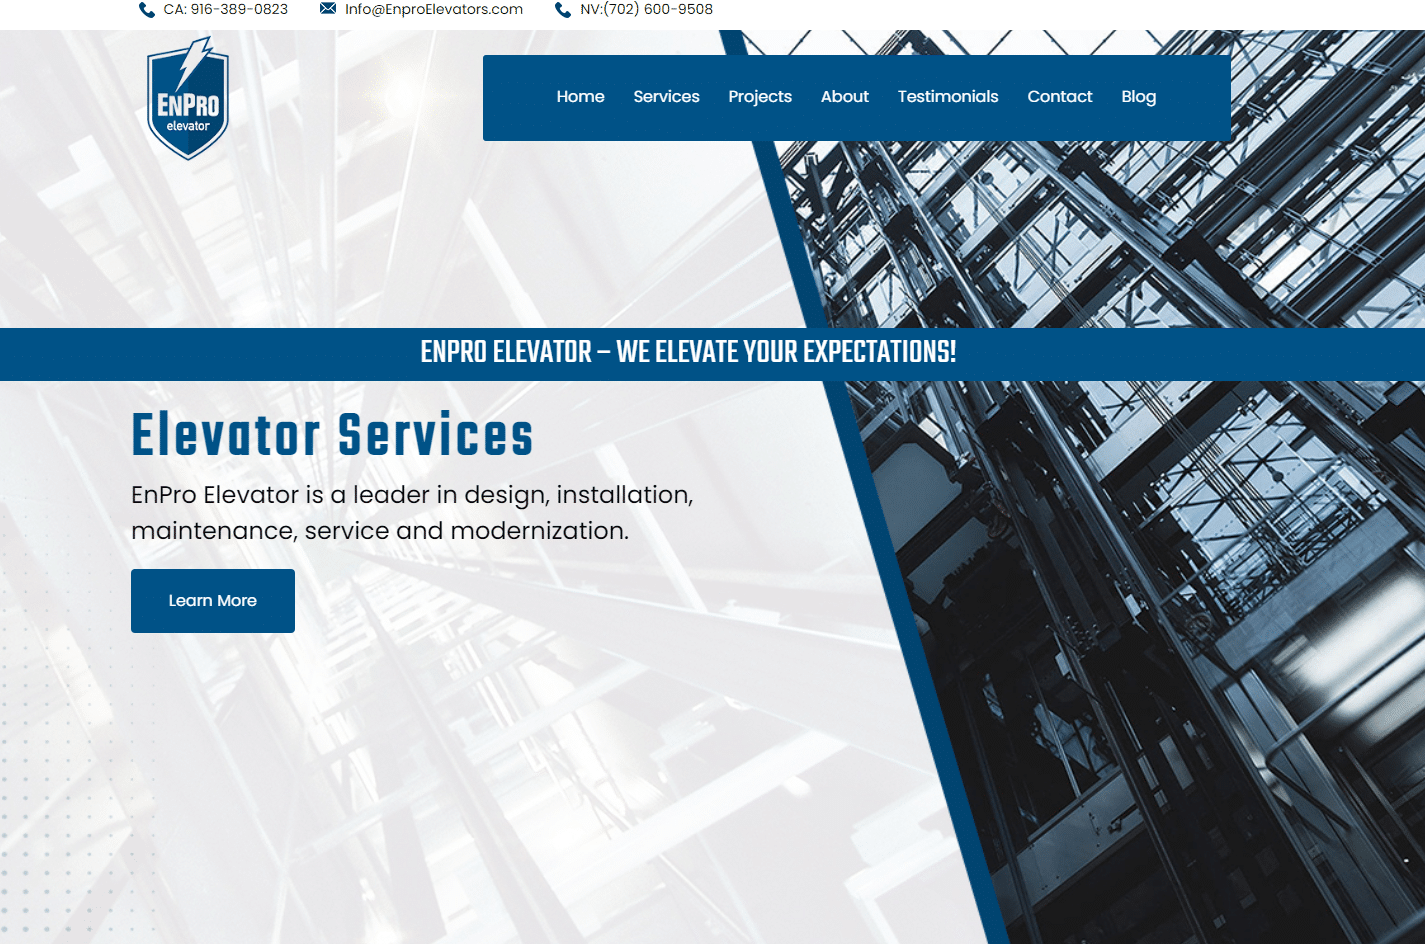 Photo of newly remodeled EnPro Elevator website home page